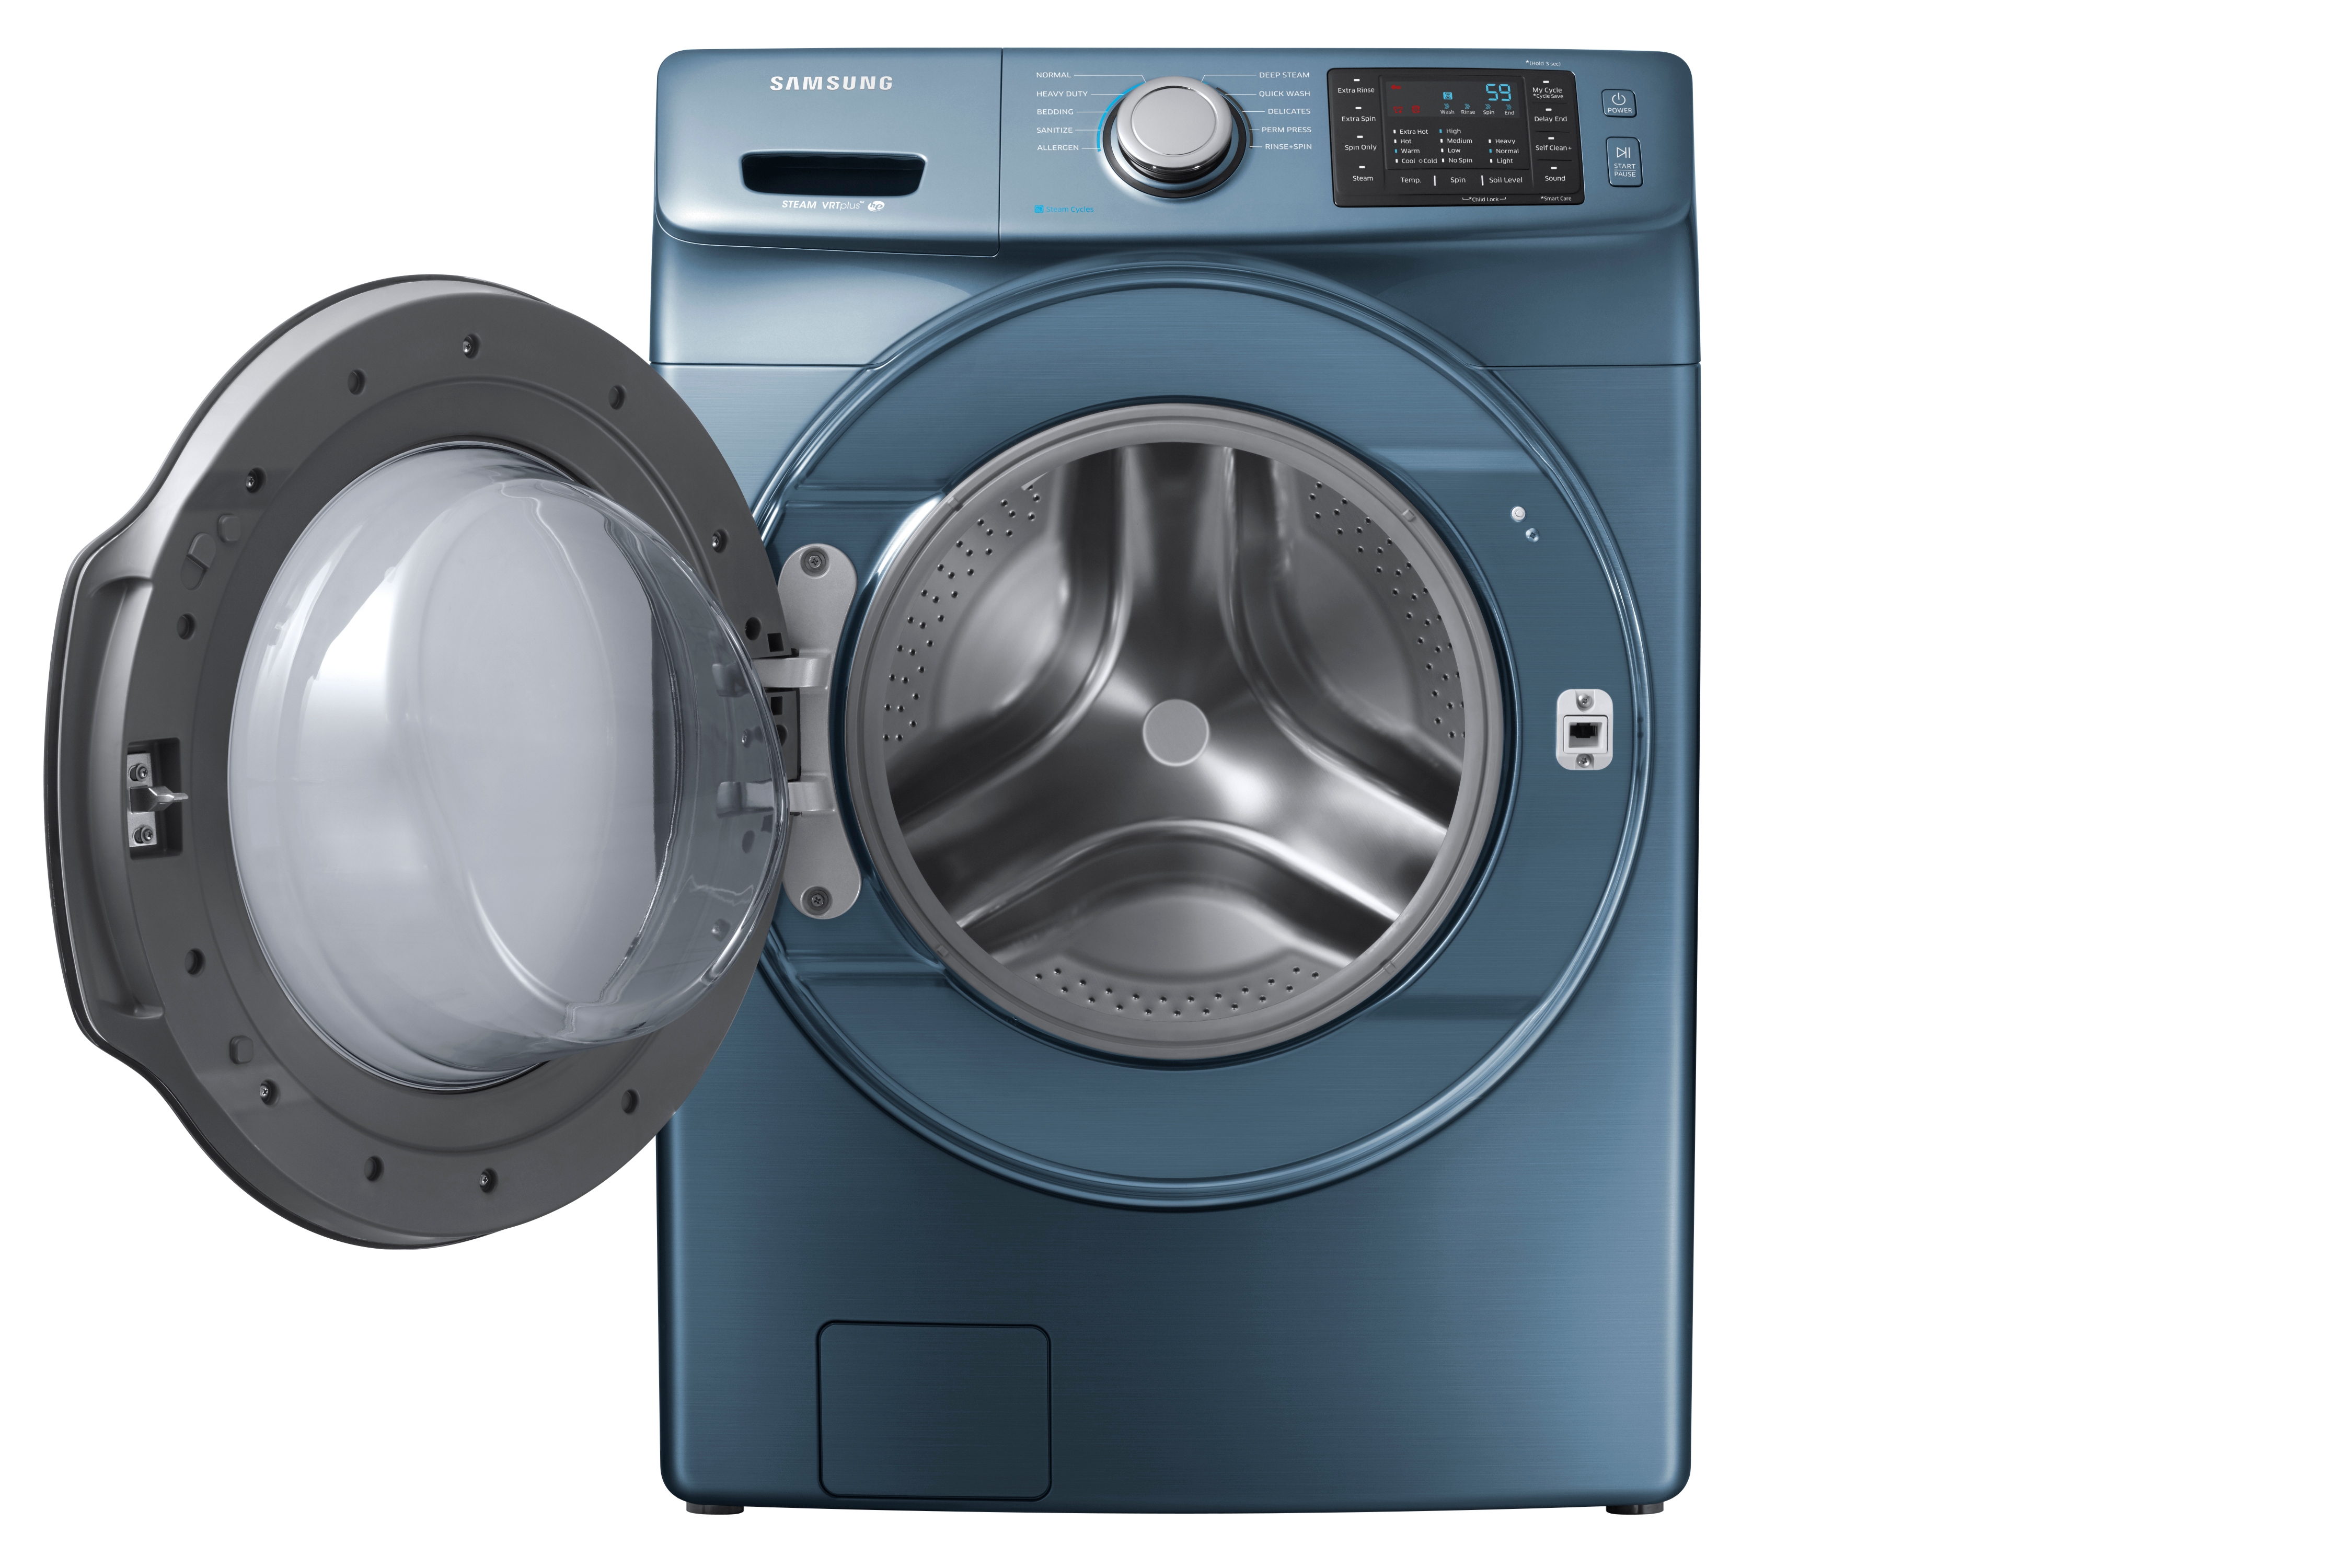 WF45M5500AZ by Samsung - 4.5 cu. ft. Front Load Washer in Azure Blue